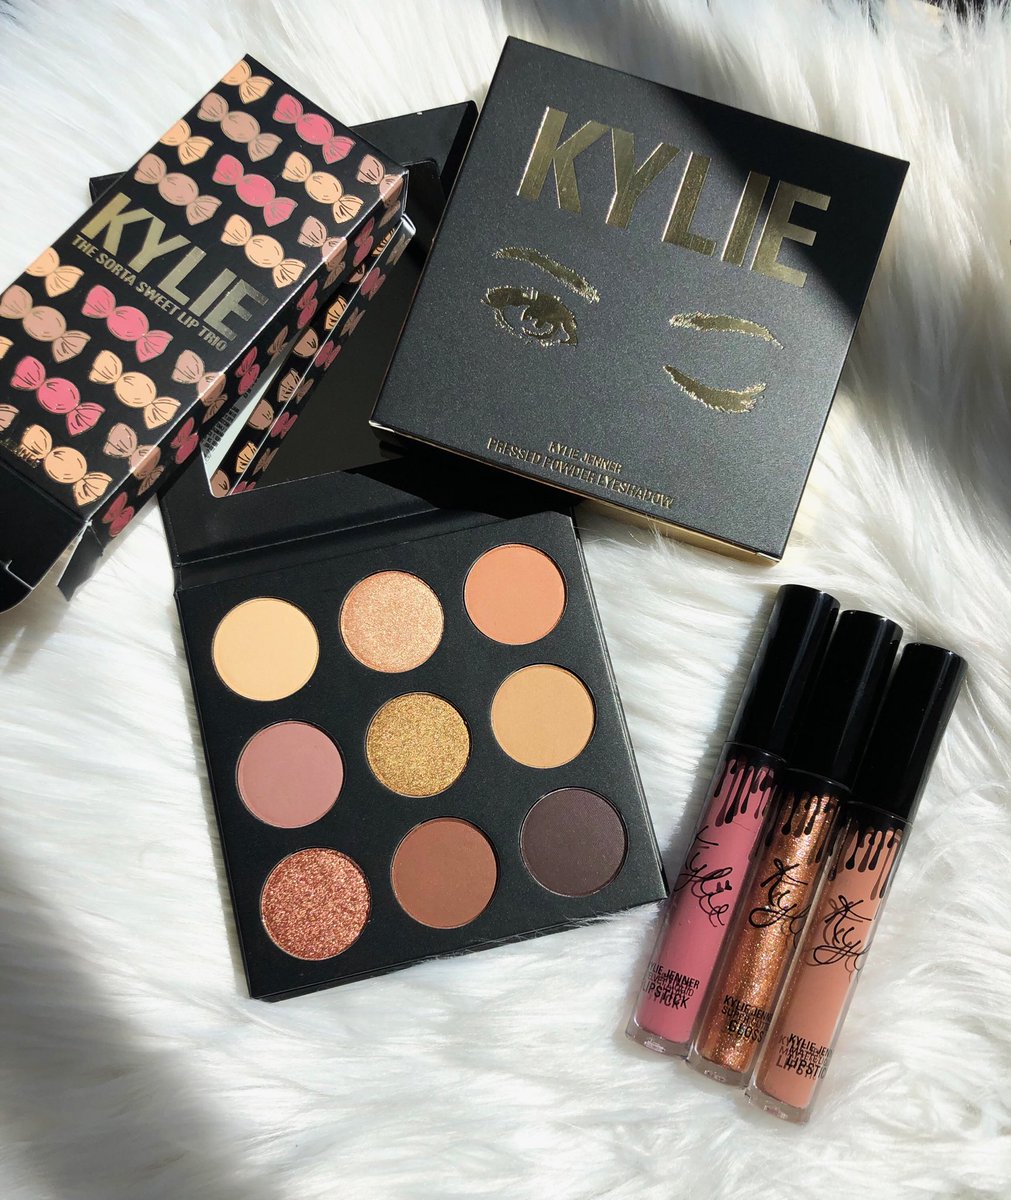 Go to Kylie Cosmetics Insta now to enter my sorta sweet giveaway! https://t.co/eVfm3SA1ns